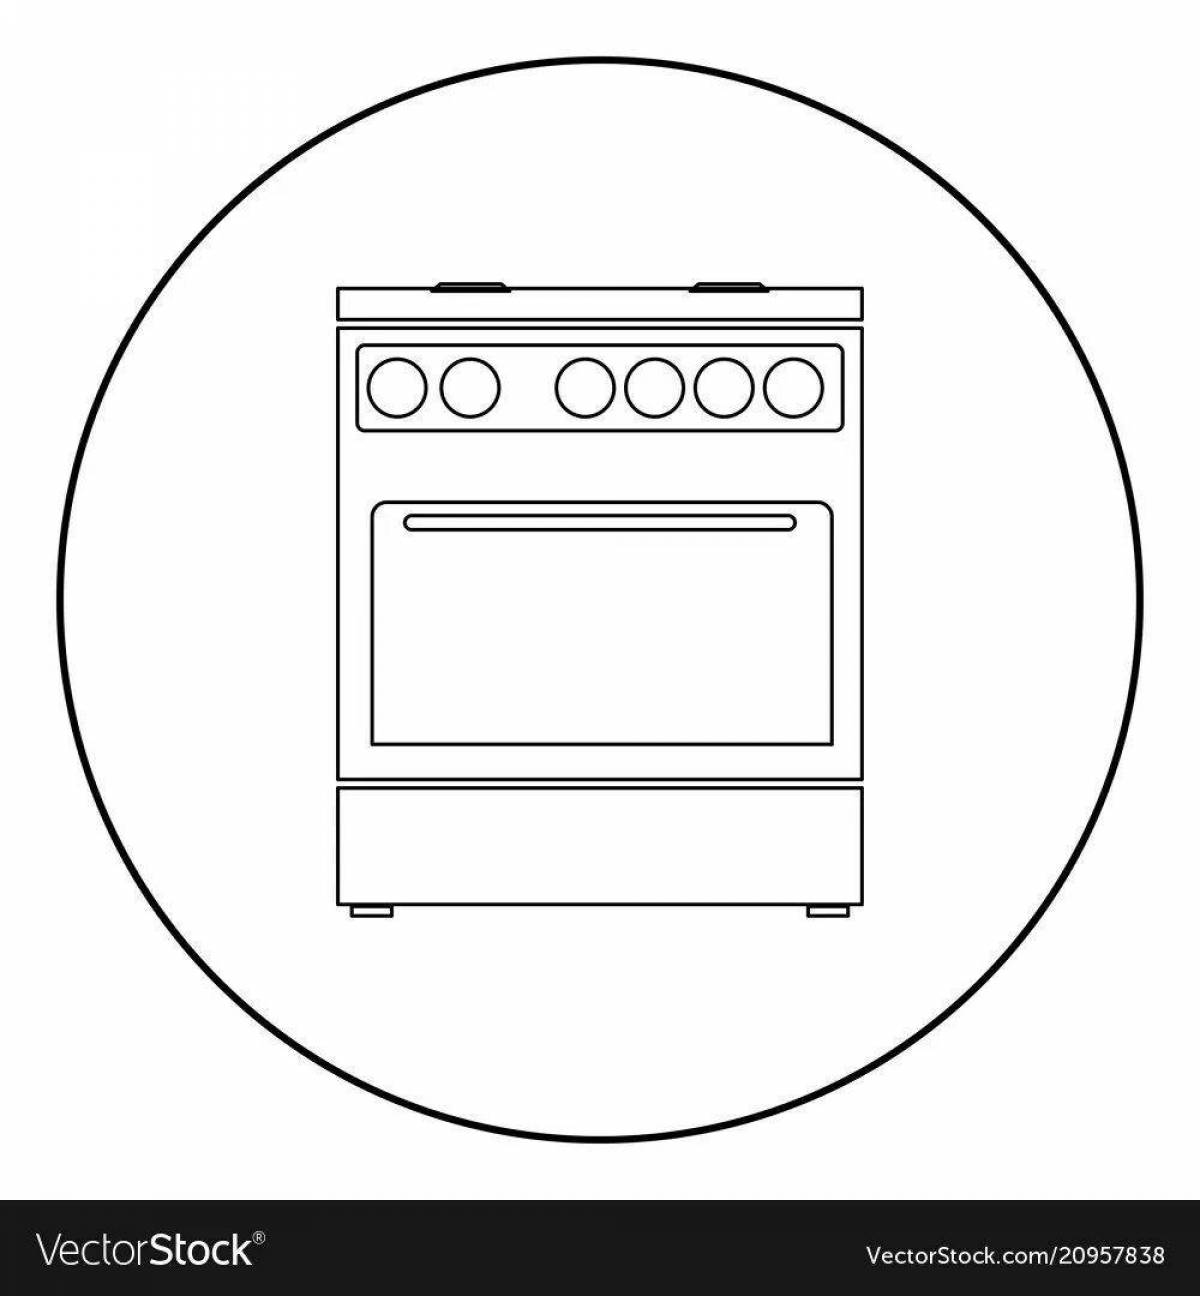 Coloring book funny stove